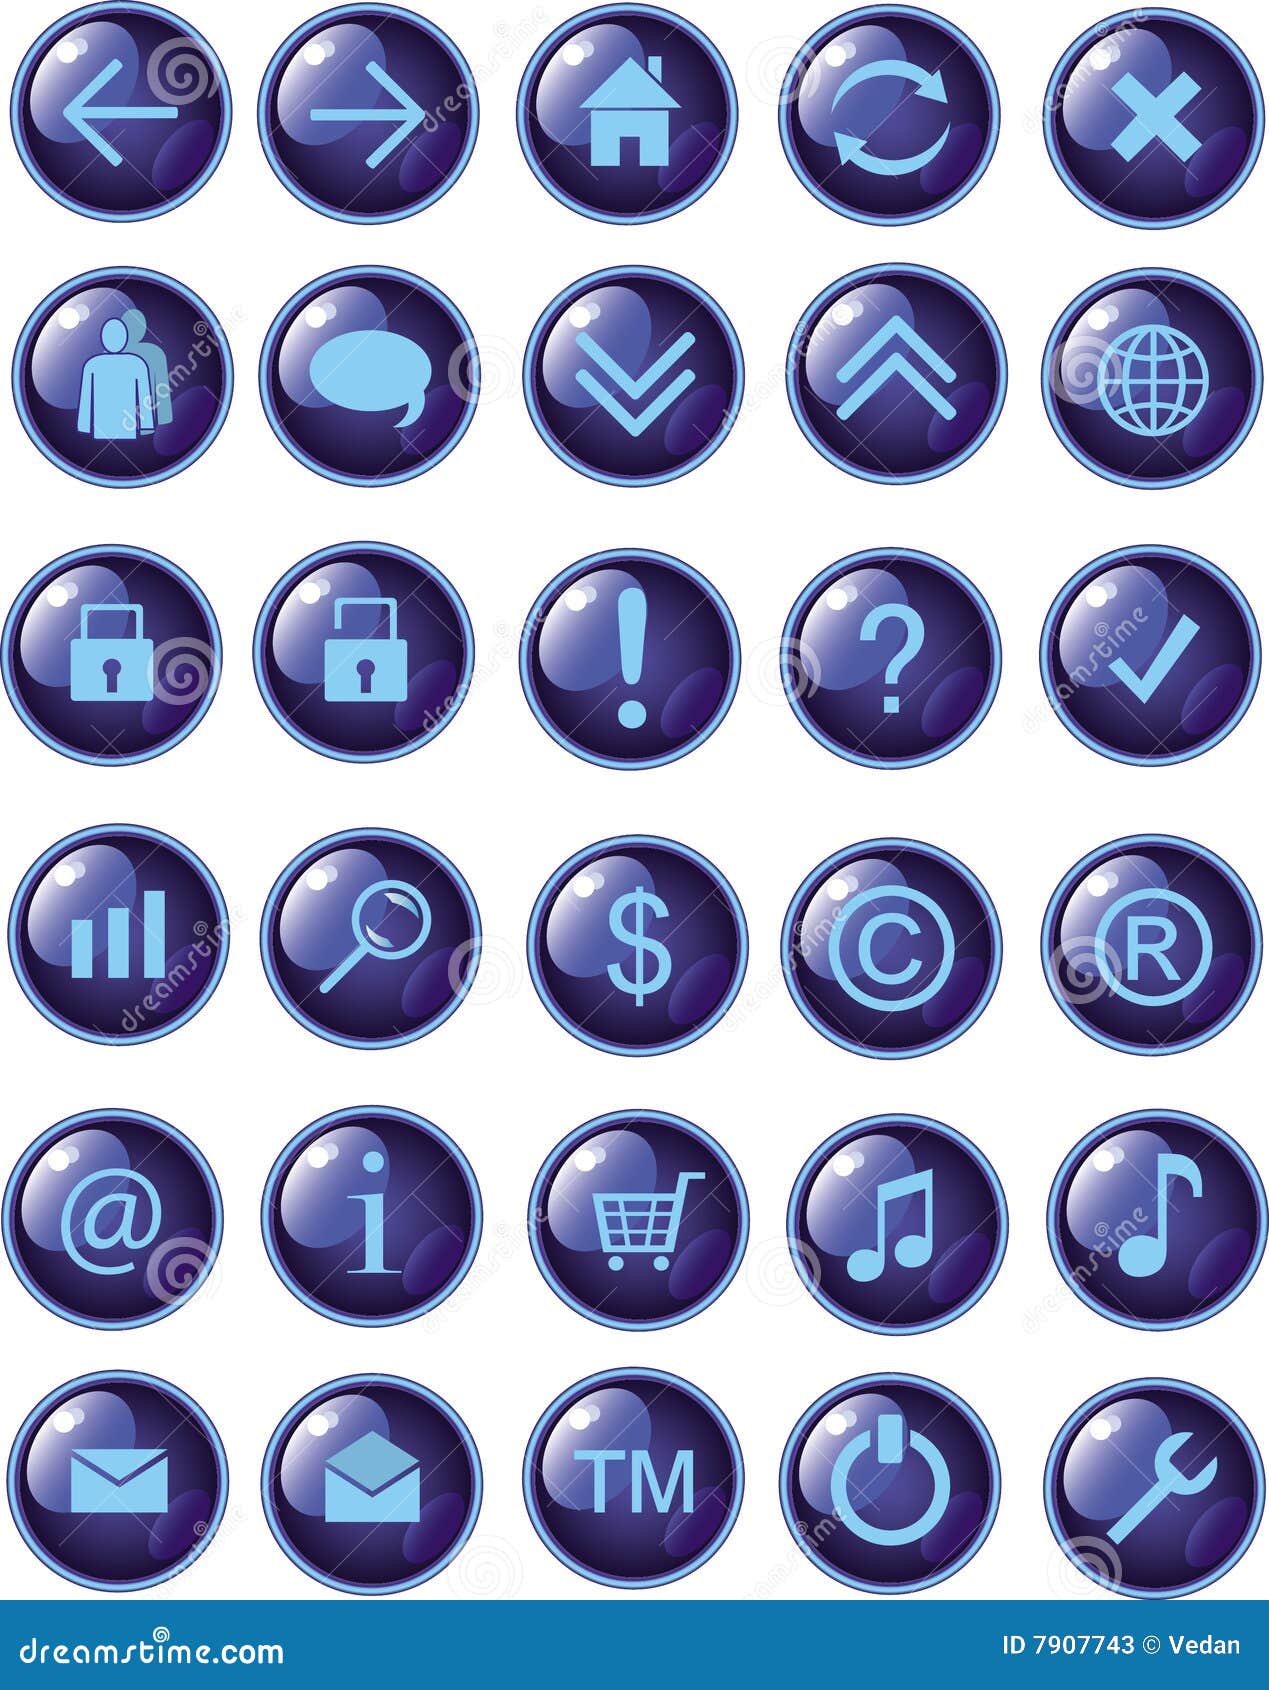 new dark blue web icons, buttons